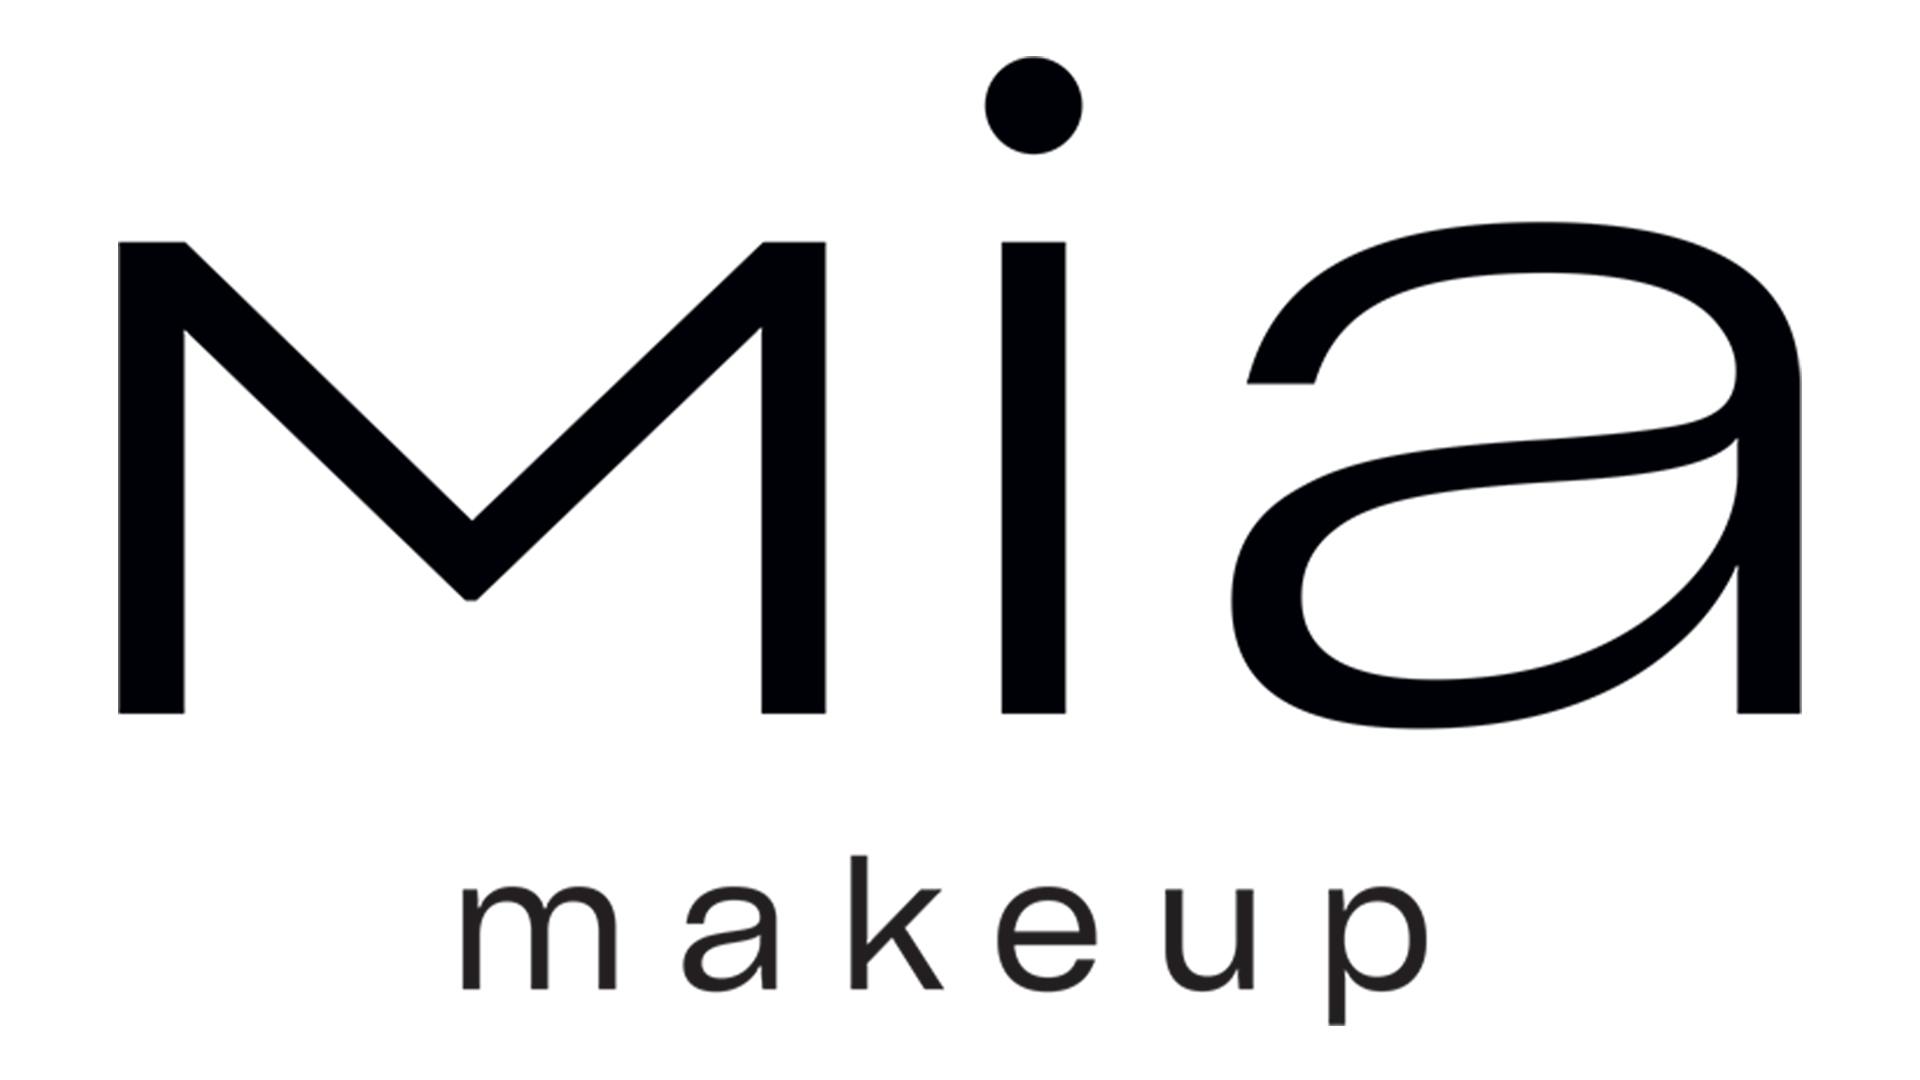 MIA MAKEUP - GLAM SCENTED WATER - DRÔLE 150 ml.